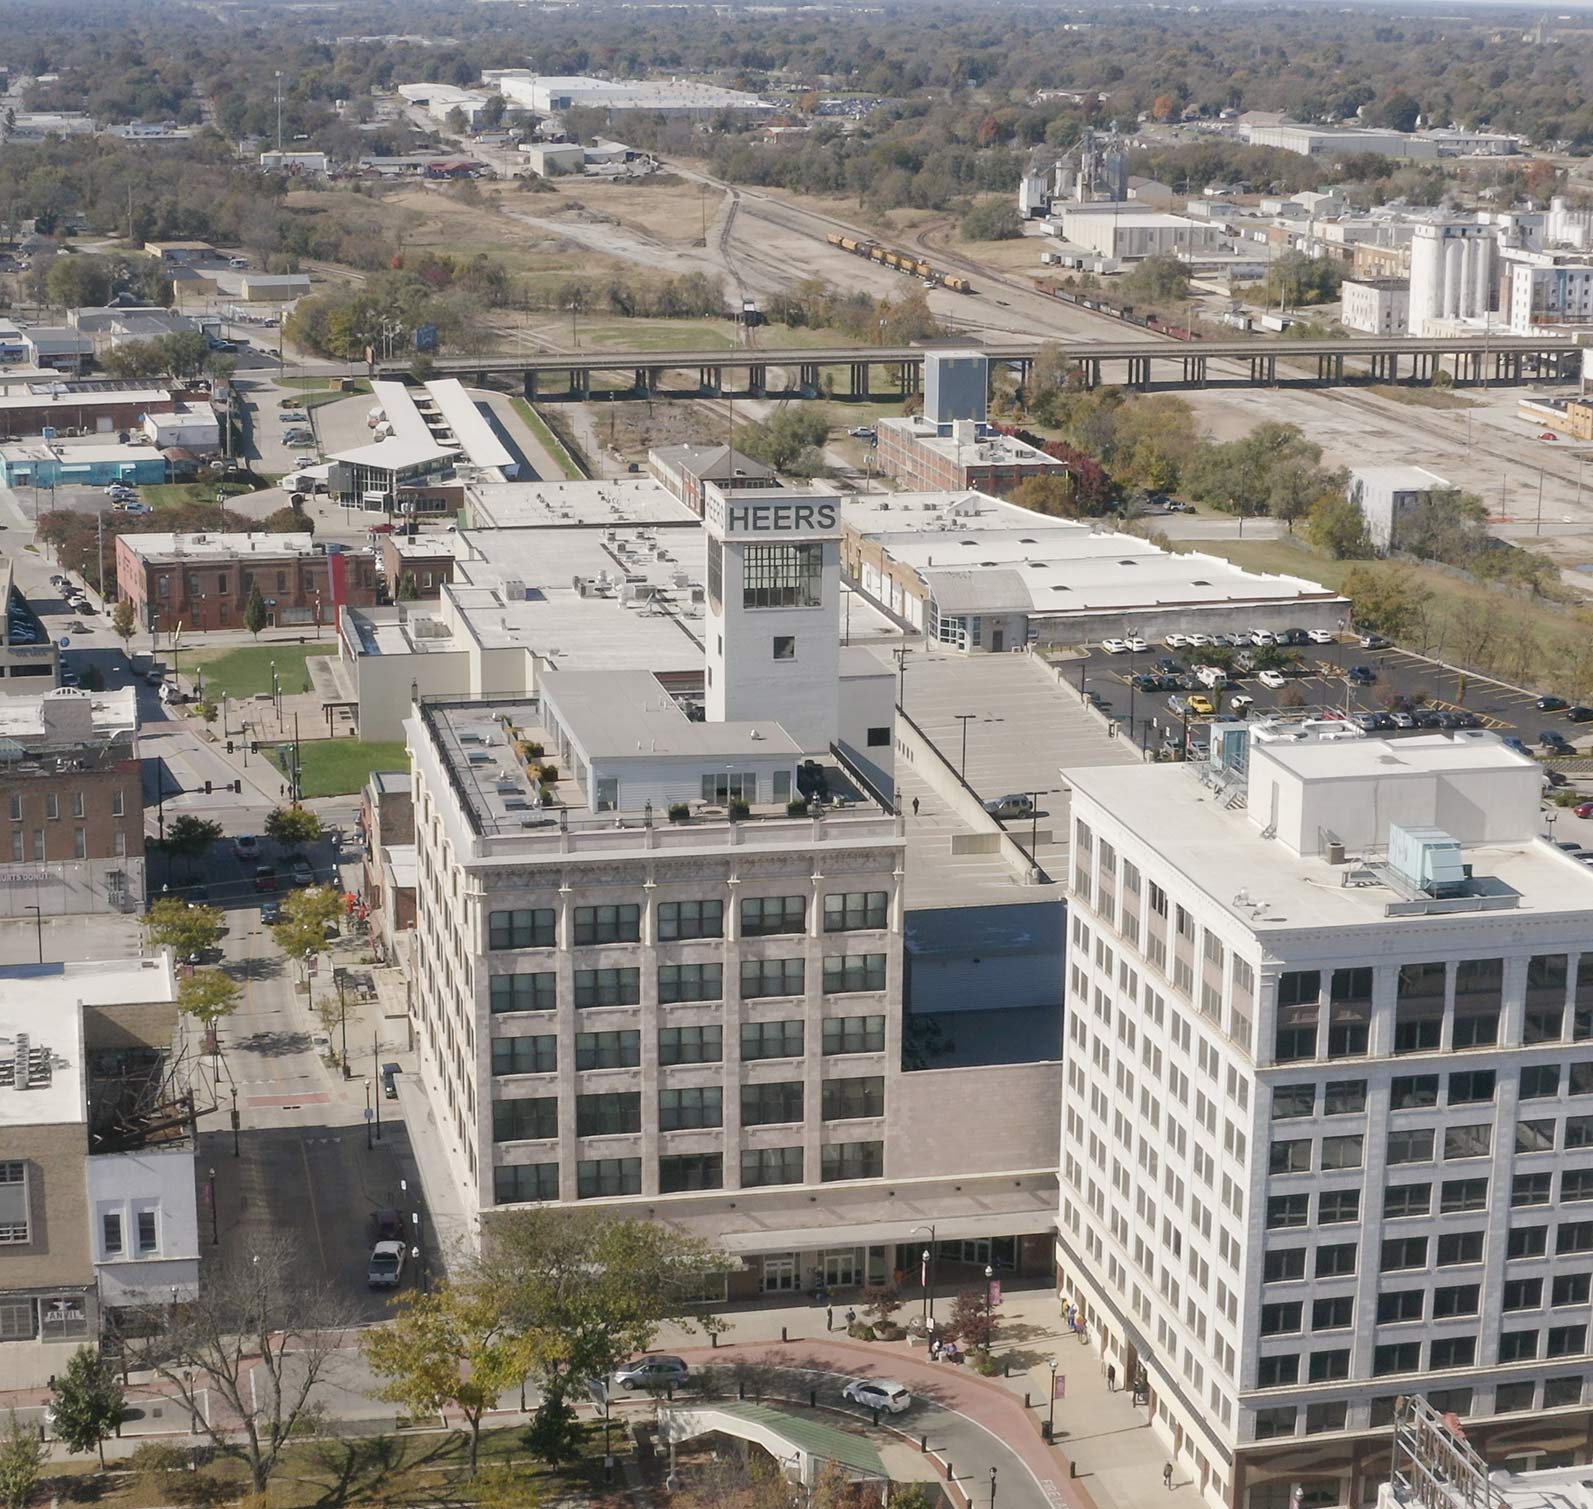 Aerial view of the Heers Luxury Living apartments on the Springfield Downtown Square